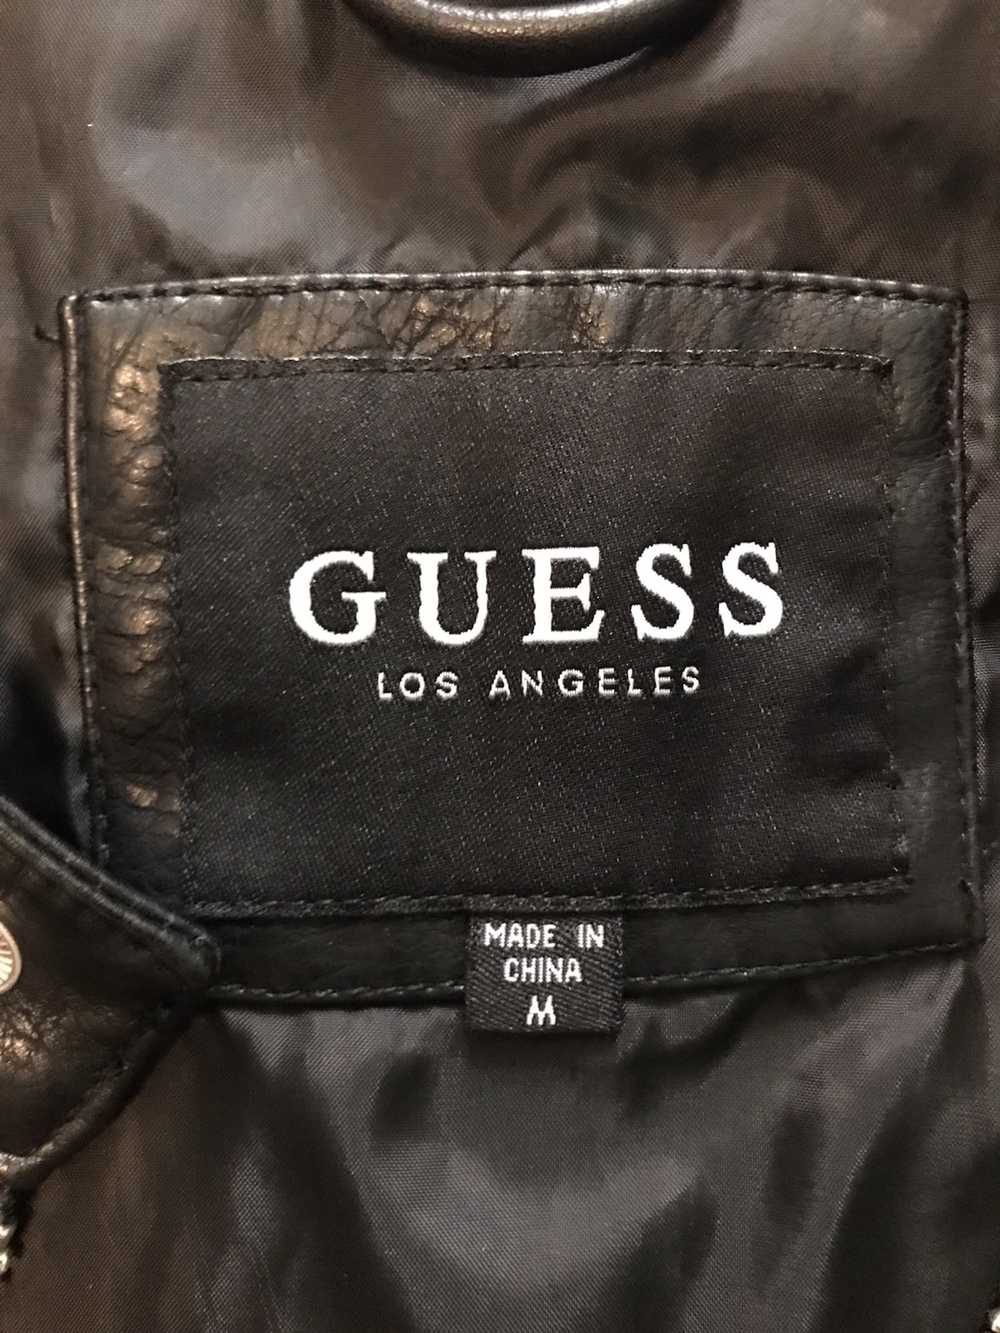 Guess Guess Leather Jacket Black - image 2